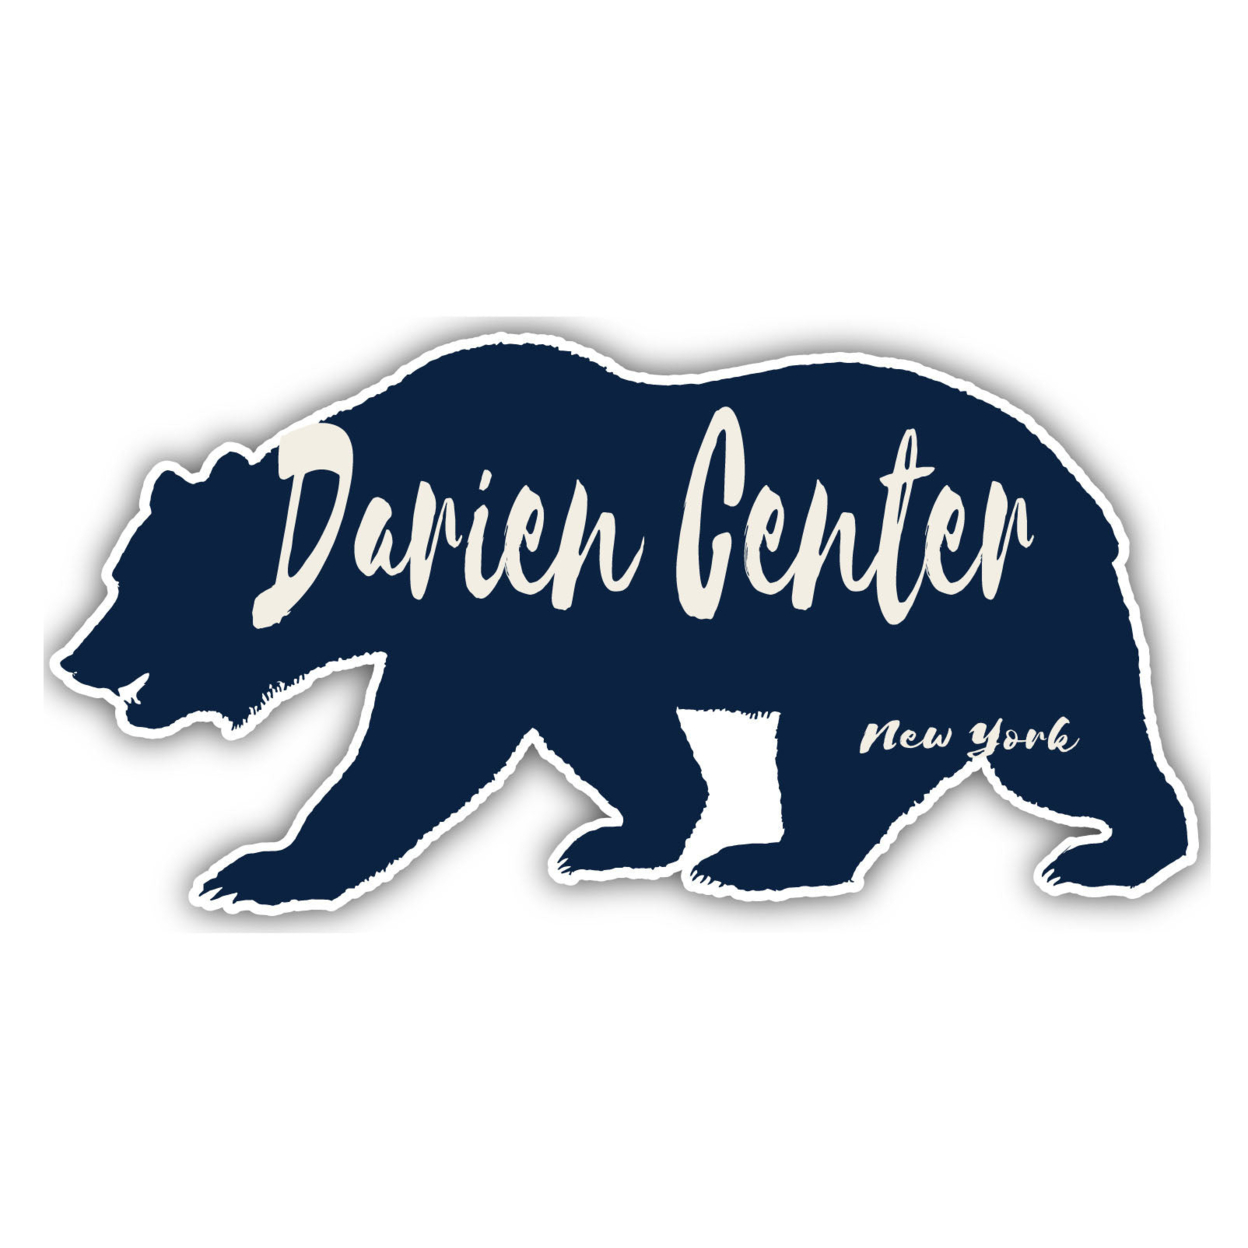 Darien Center New York Souvenir Decorative Stickers (Choose Theme And Size) - 4-Pack, 4-Inch, Tent